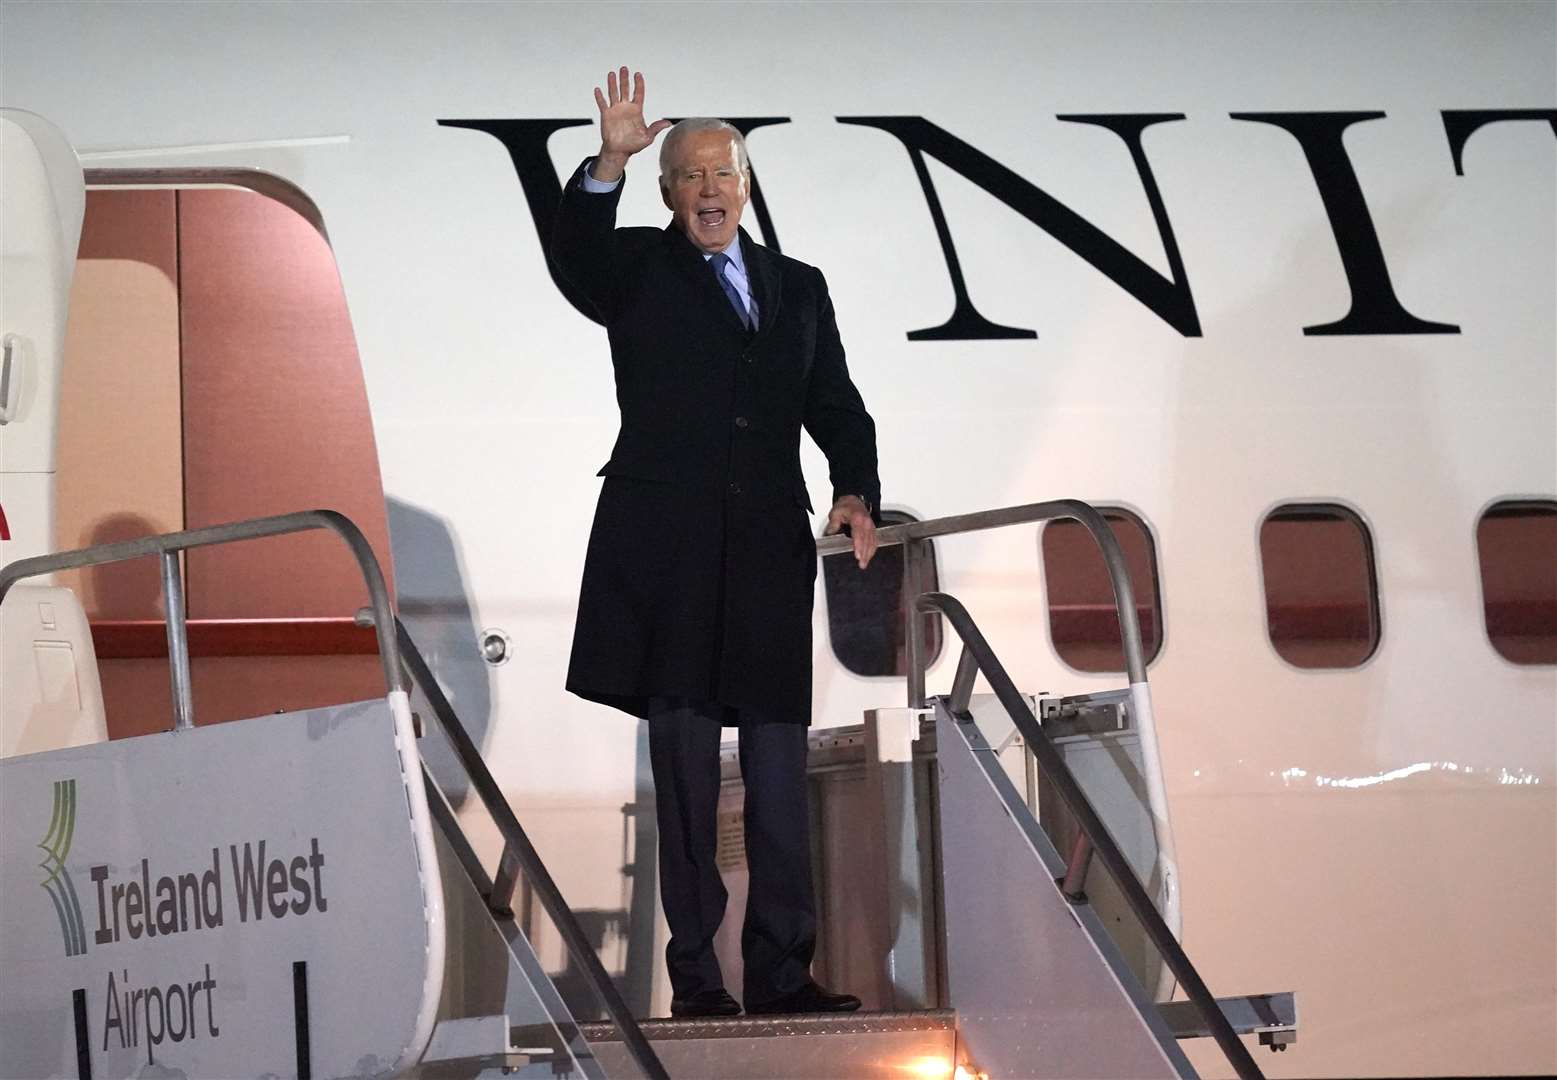 US President Joe Biden boards a plane to leave Ireland West Airport Knock, in County Mayo, on the last day of his visit to the island of Ireland (Niall Carson/PA)